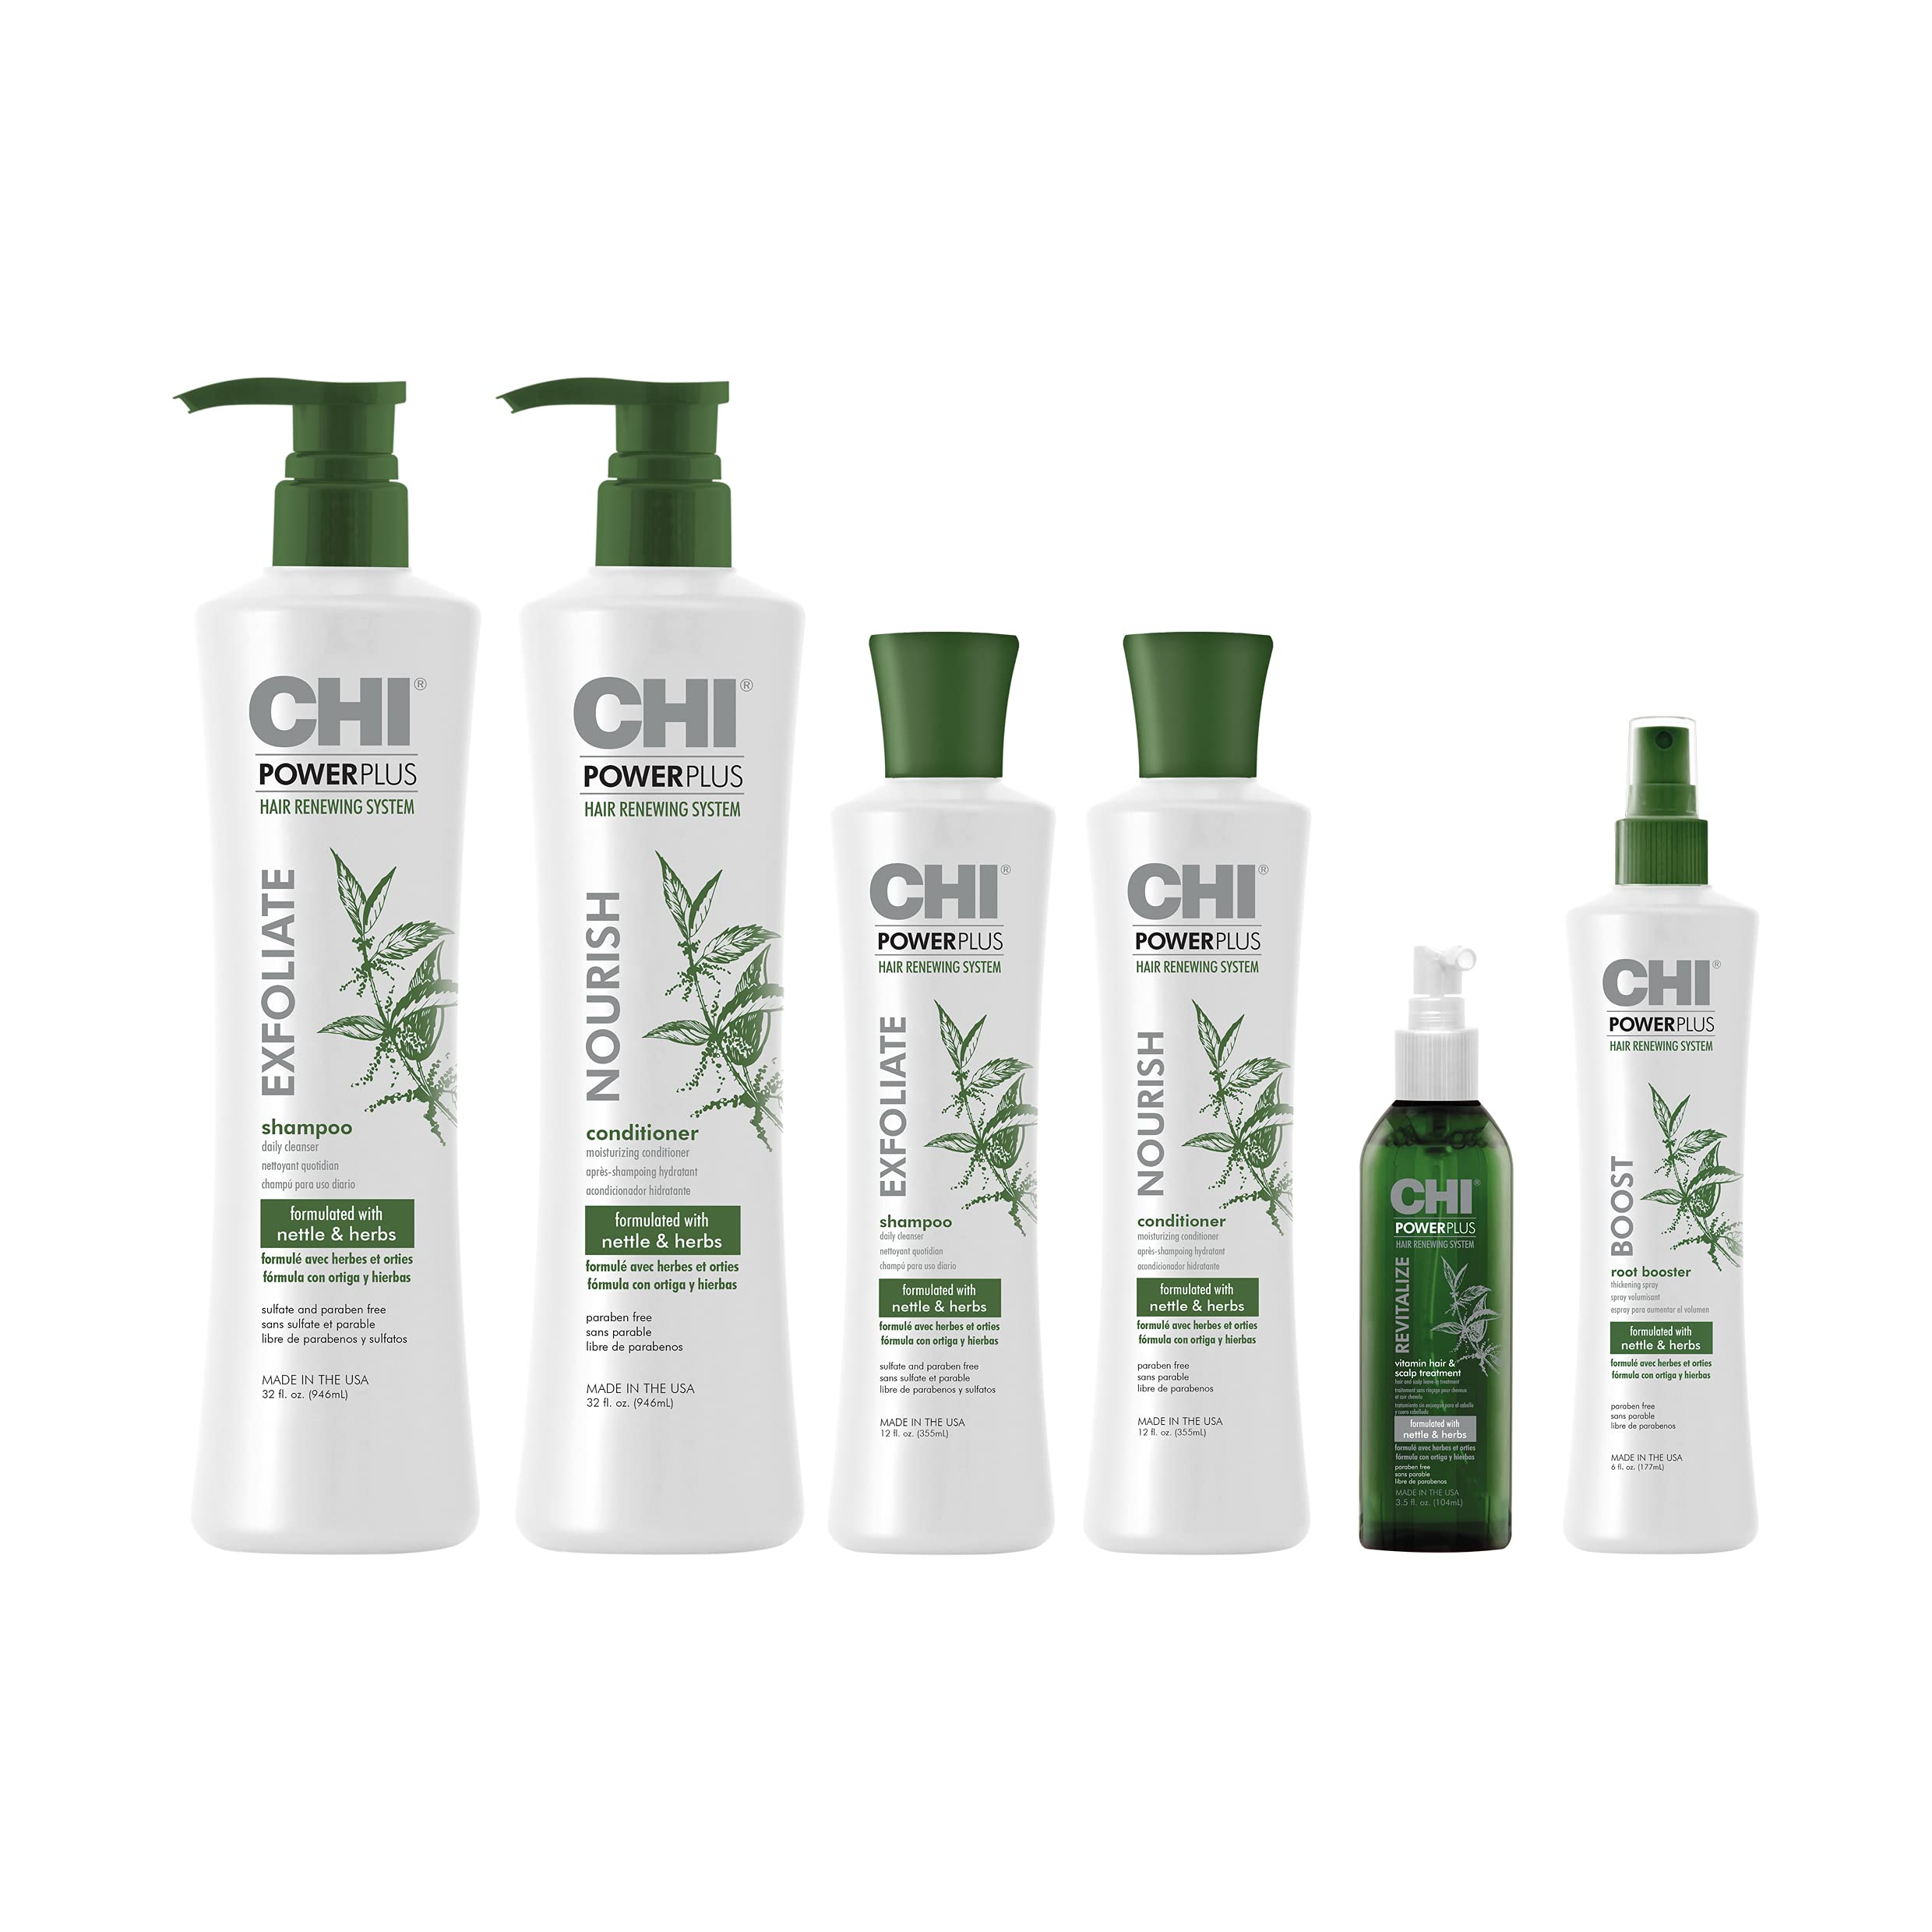 CHI Powerplus Nourish Conditioner Hair Renew System Healthy Scalp, 32 Ounce